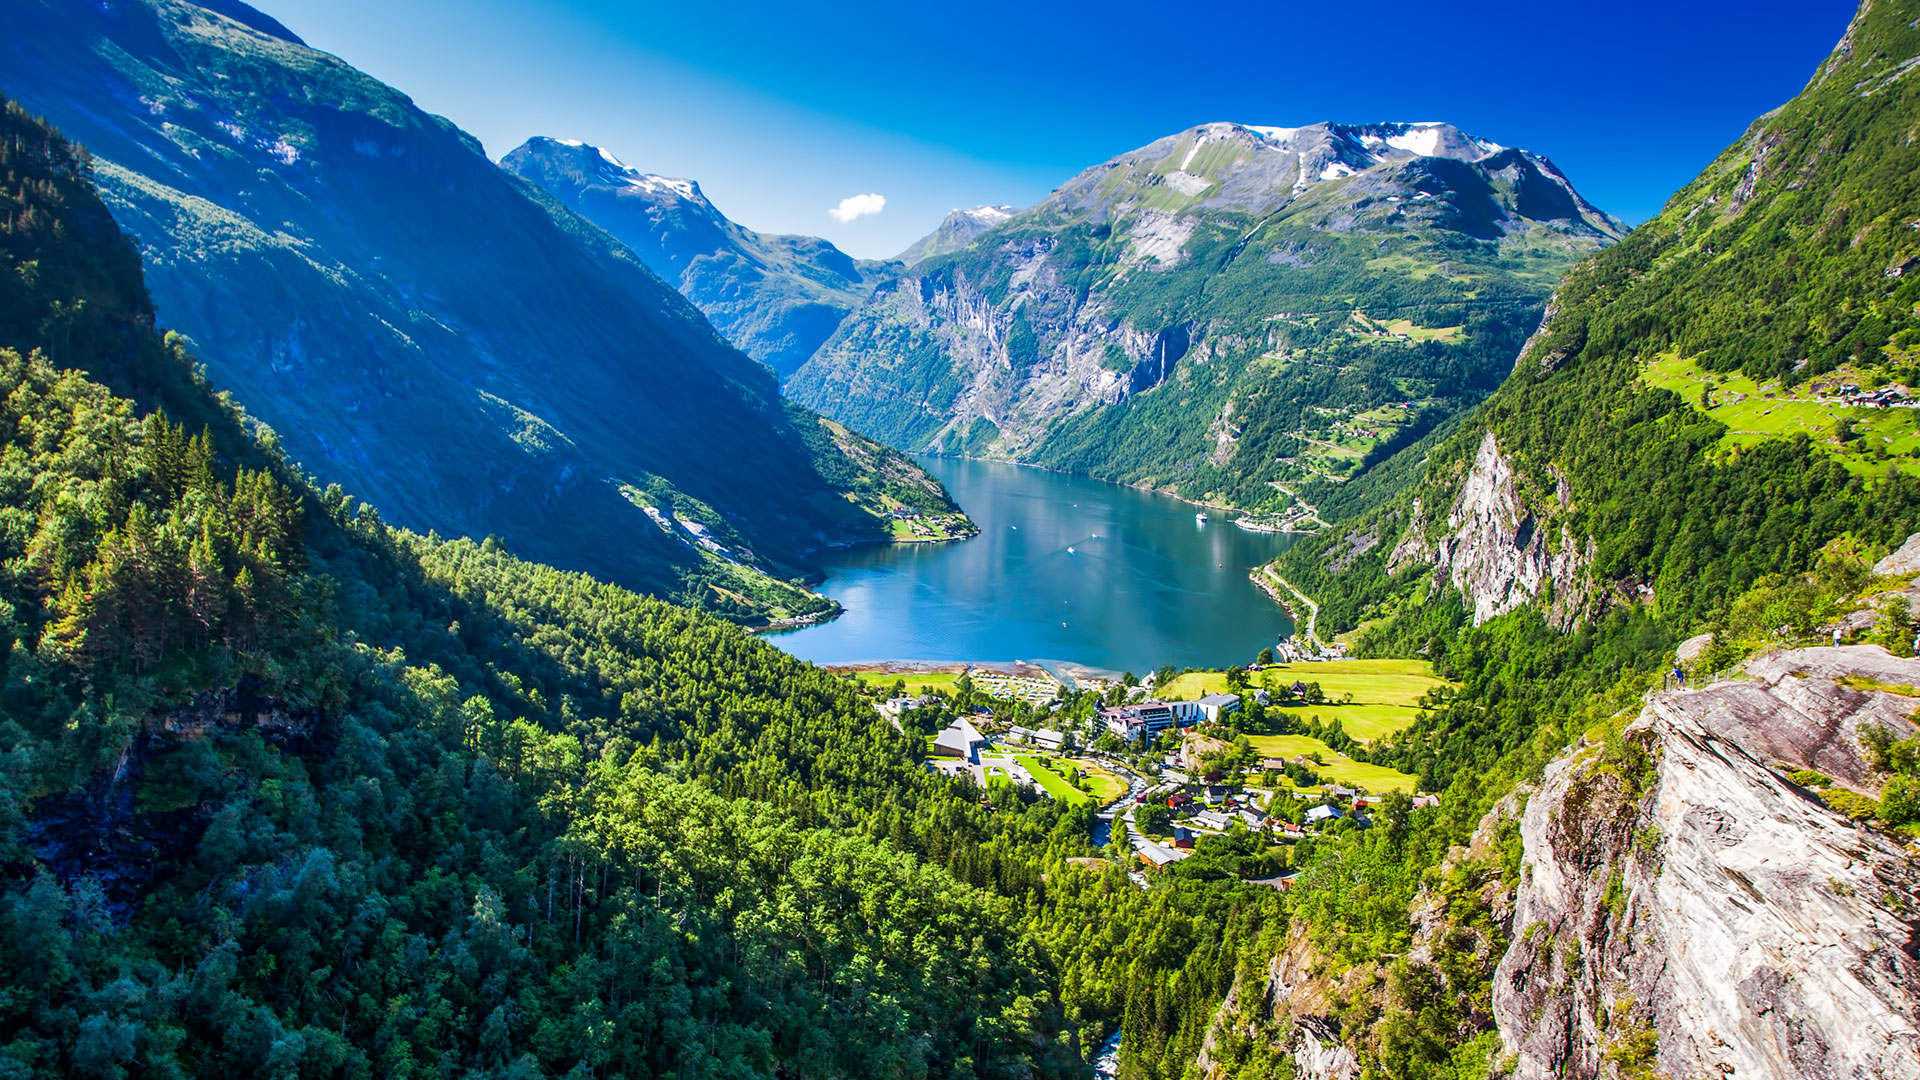 The Geirangerfjord, Norway